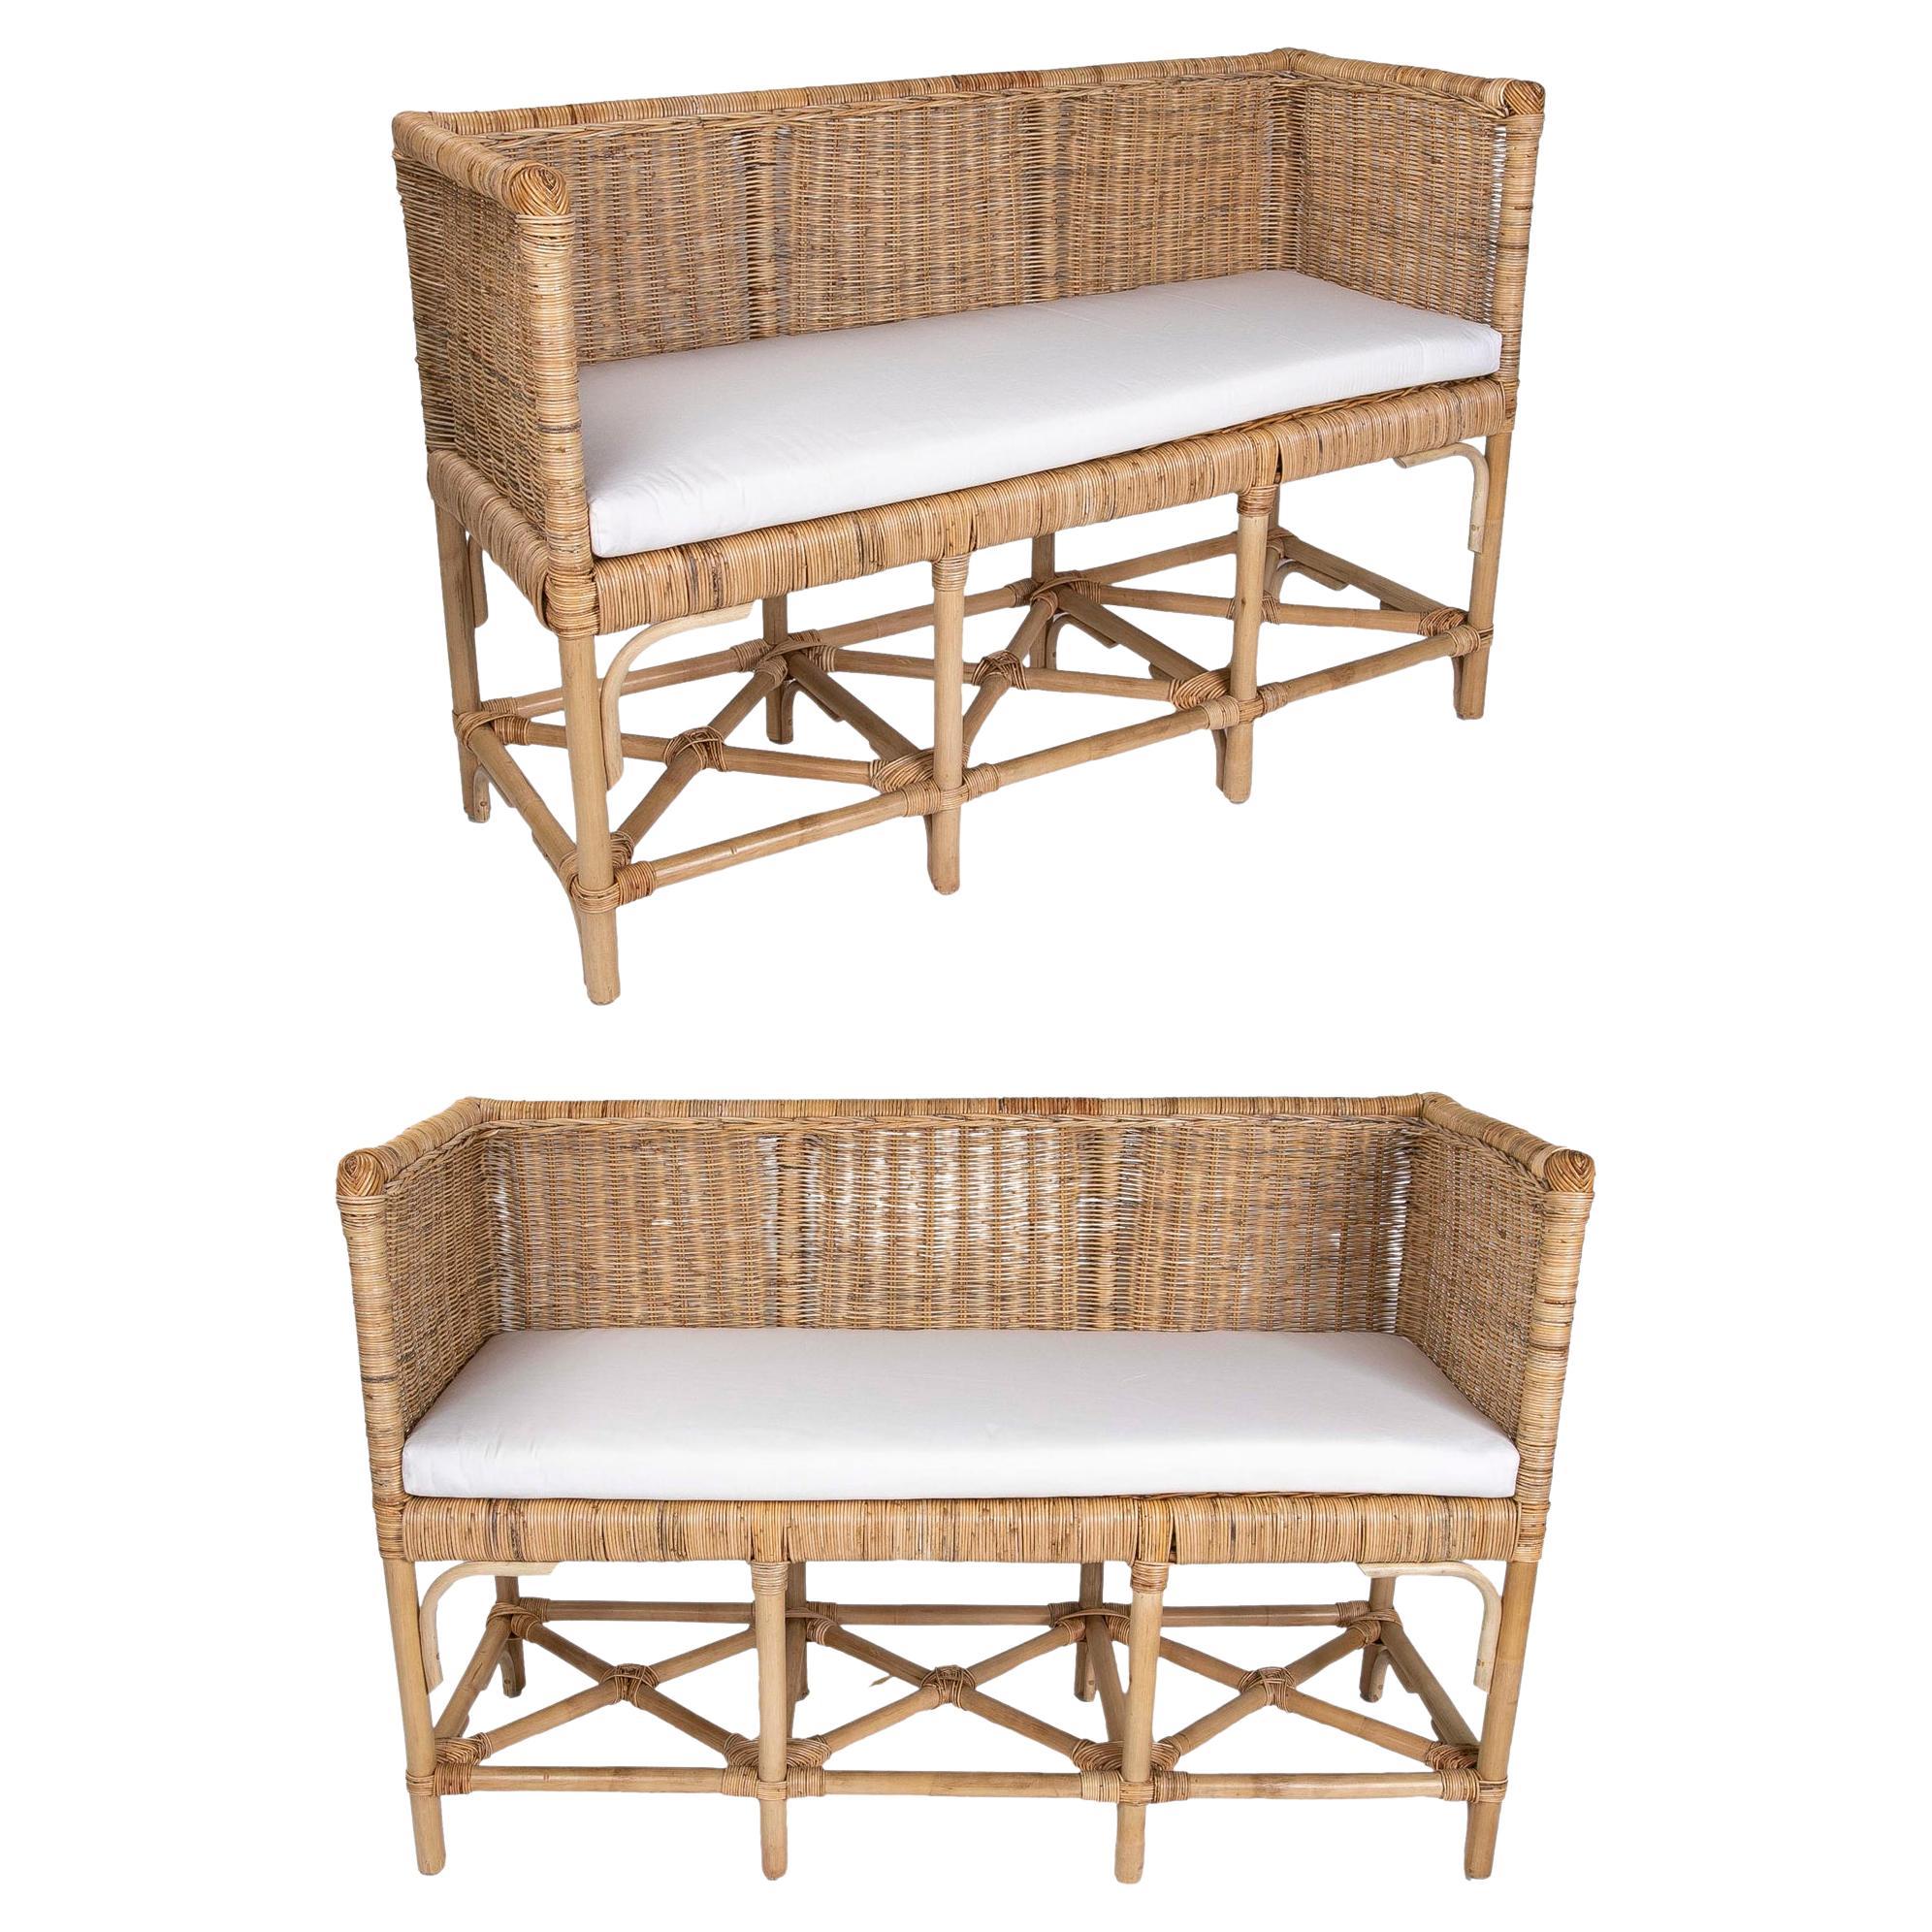 Pair of Handmade Rattan Benches with Straight Arms and Backrest